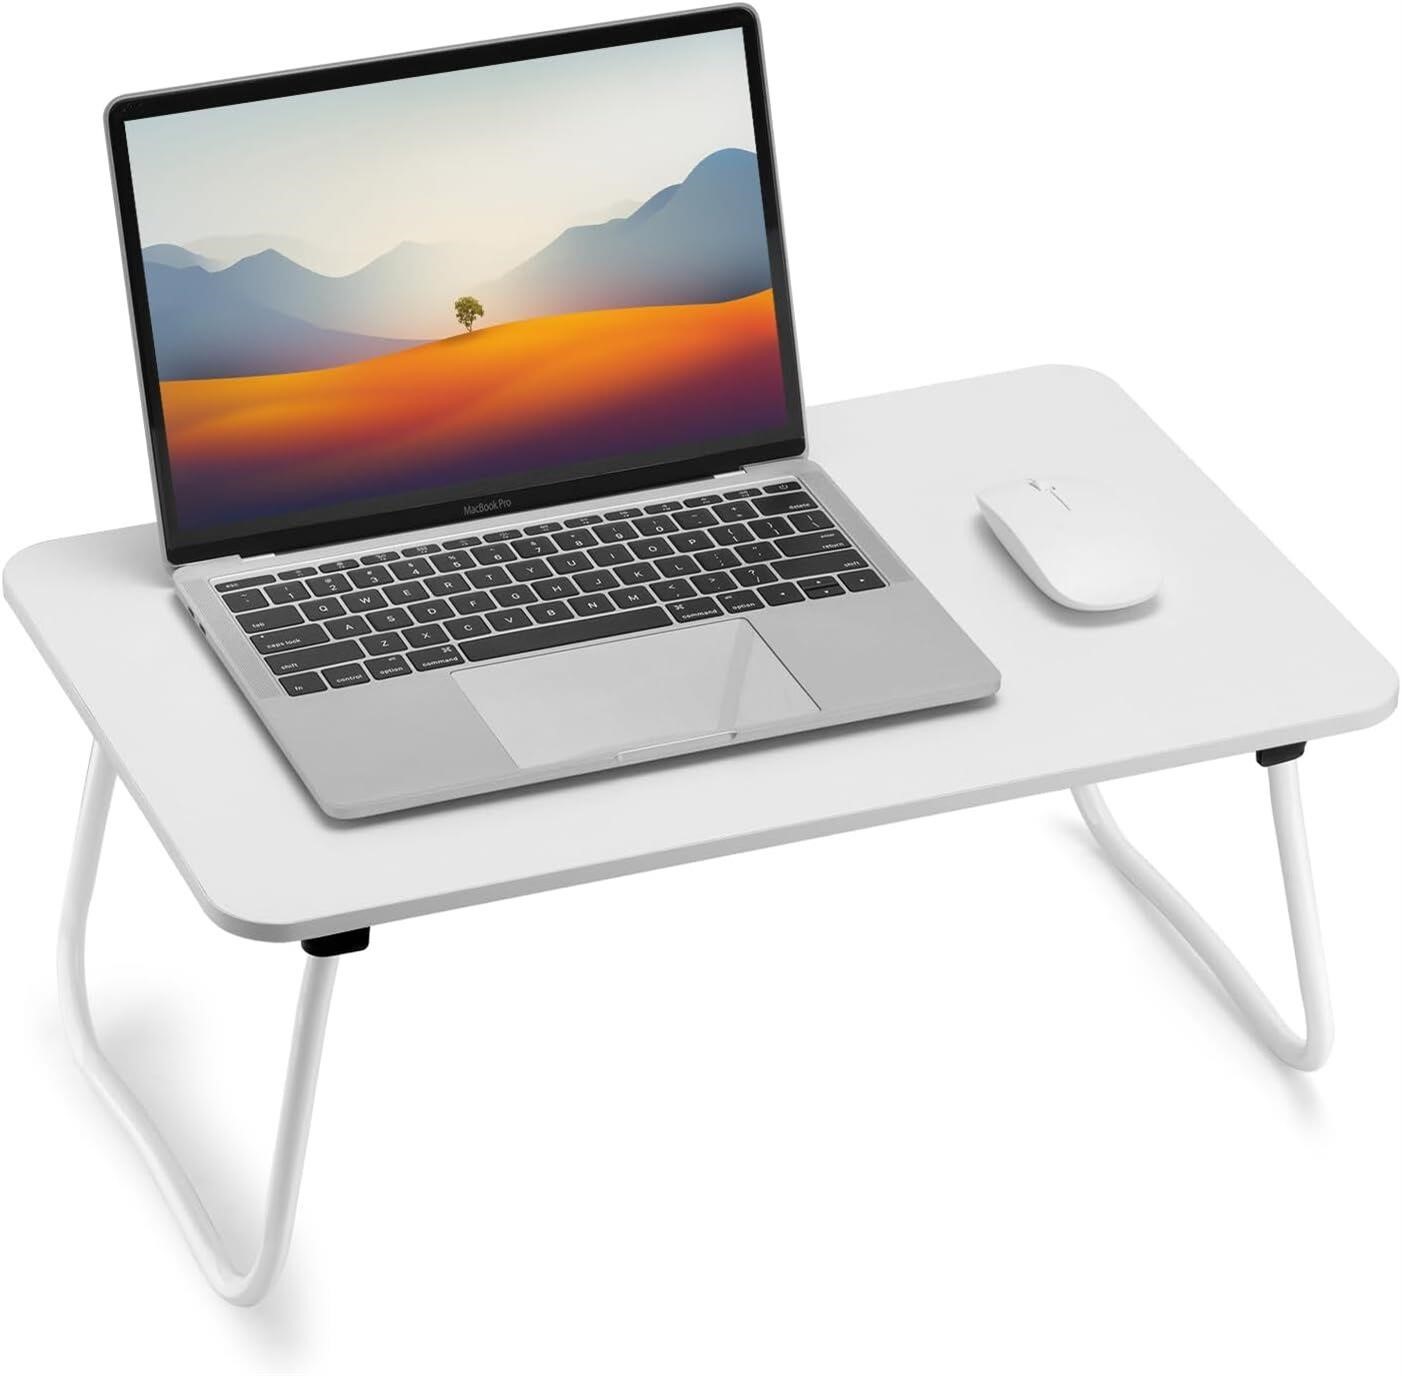 FISYOD Foldable Desk  Bed Table - White